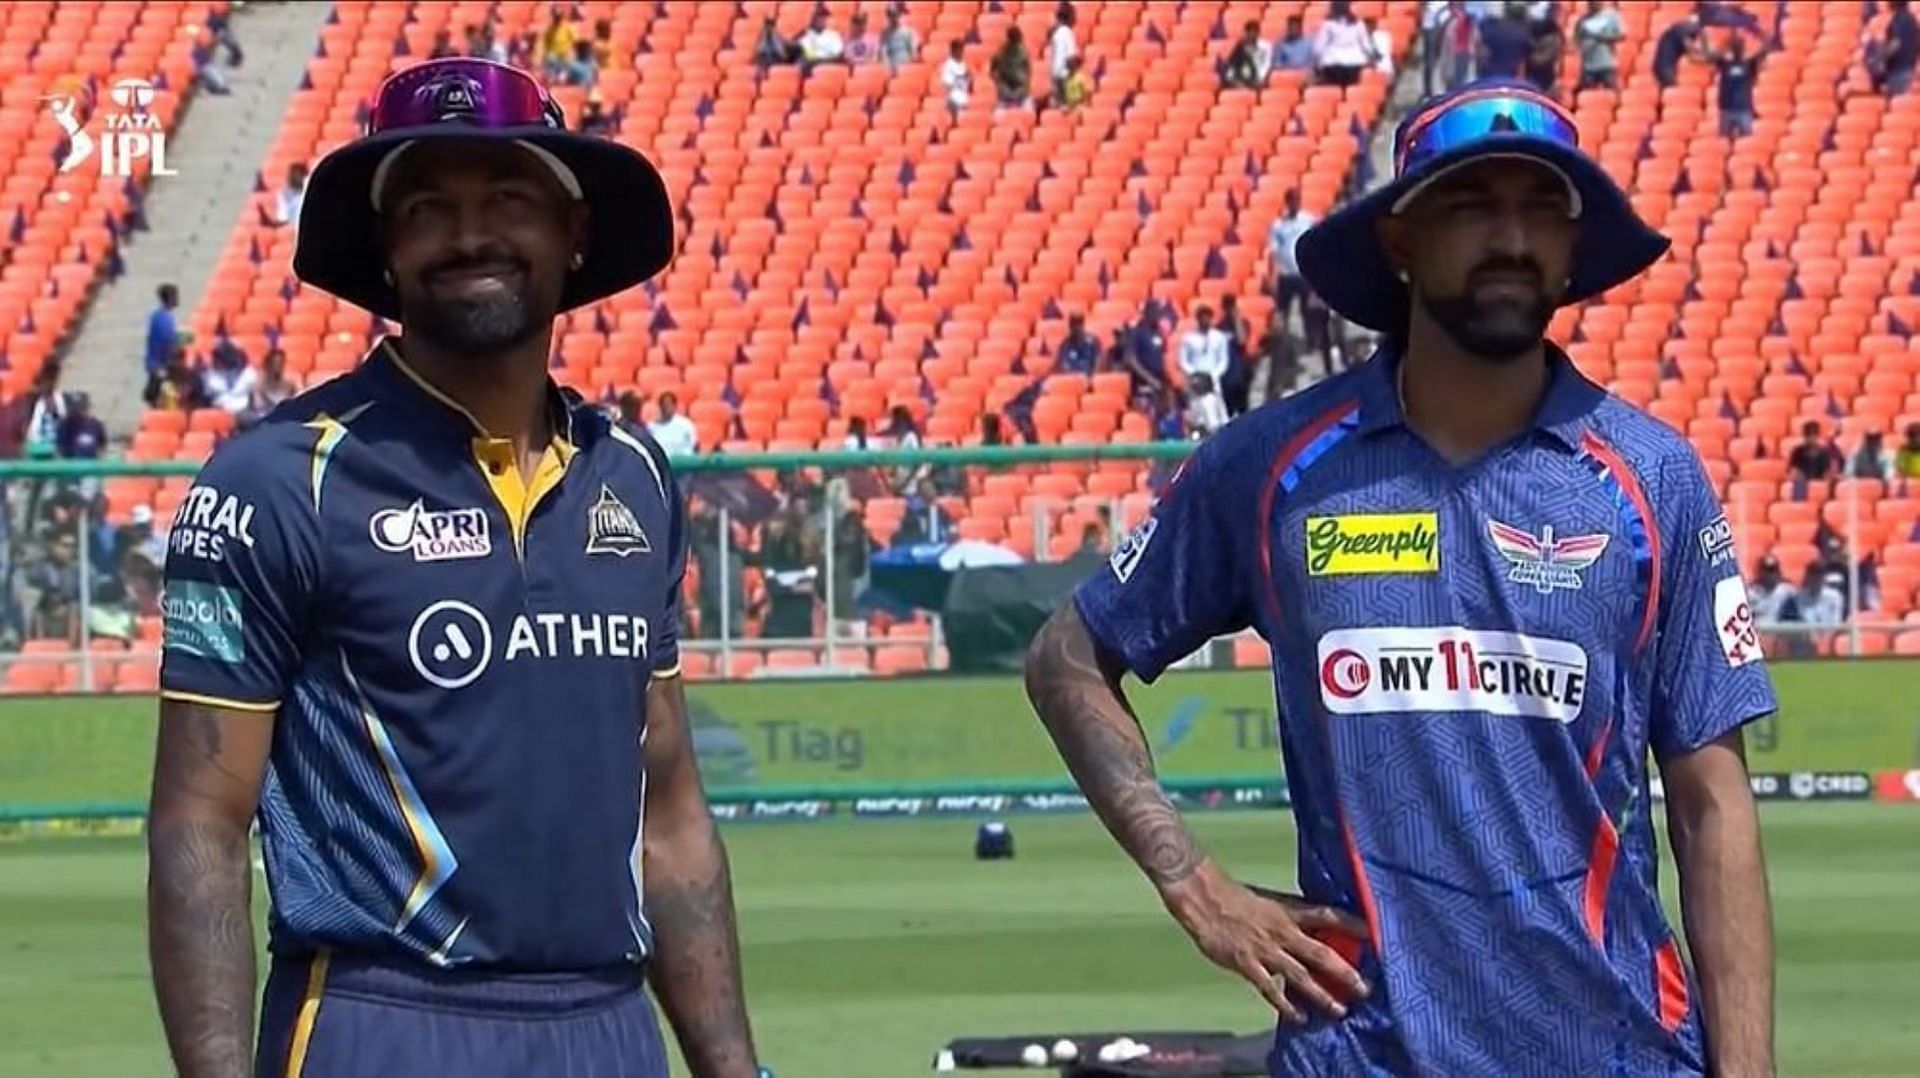 The Pandya brothers were out at toss as their respective team captains. (Credit: Twitter)